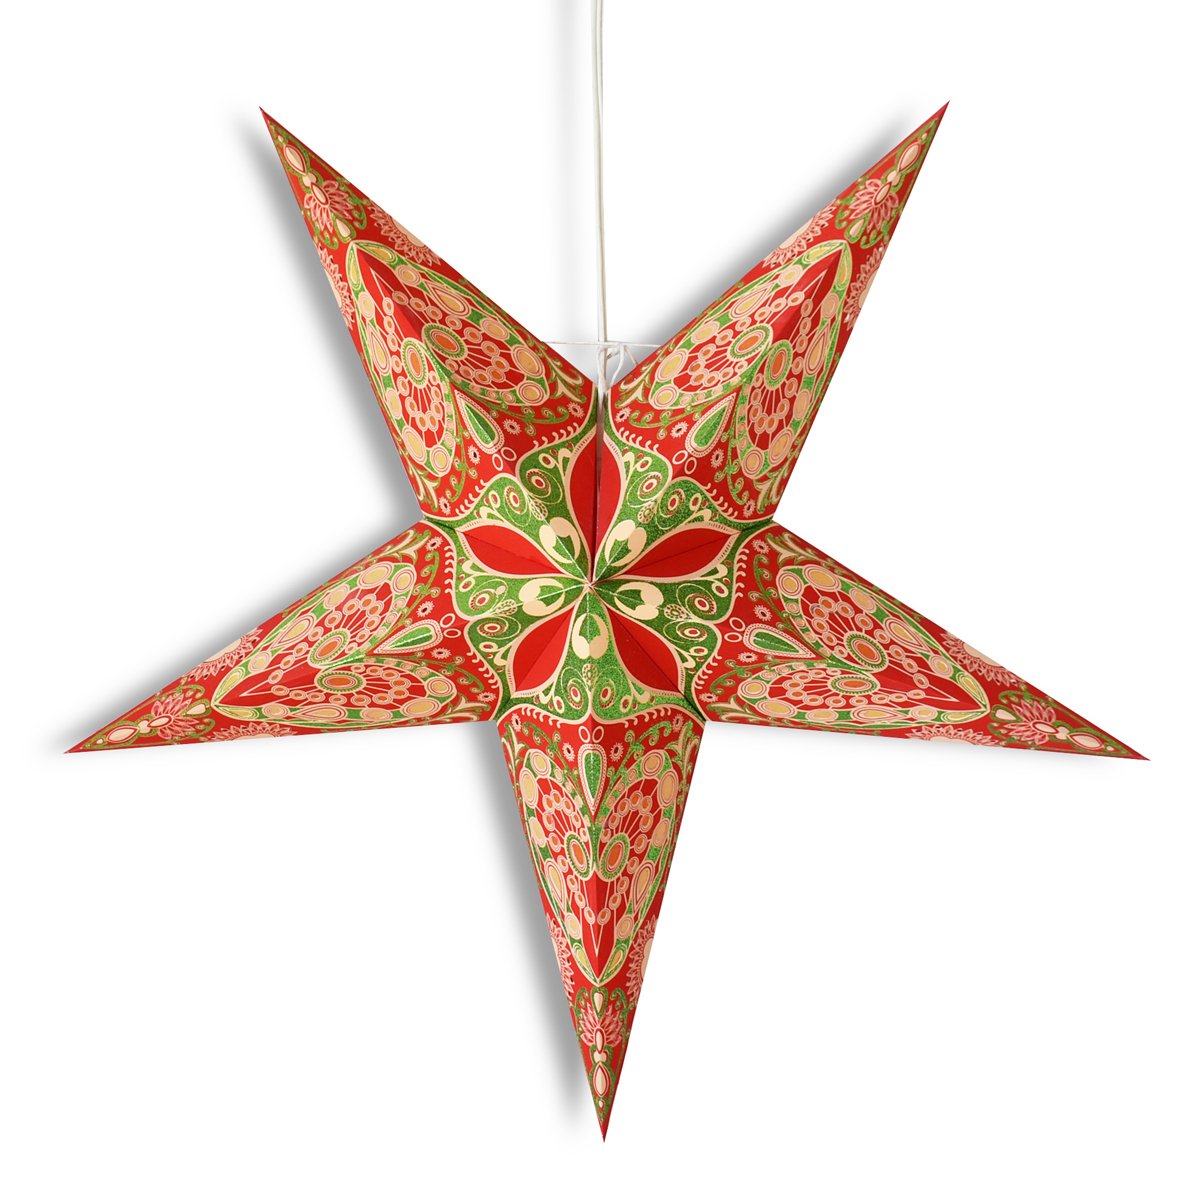 24" Red Heart Paper Star Lantern, Hanging Wedding & Party Decoration - AsianImportStore.com - B2B Wholesale Lighting and Decor